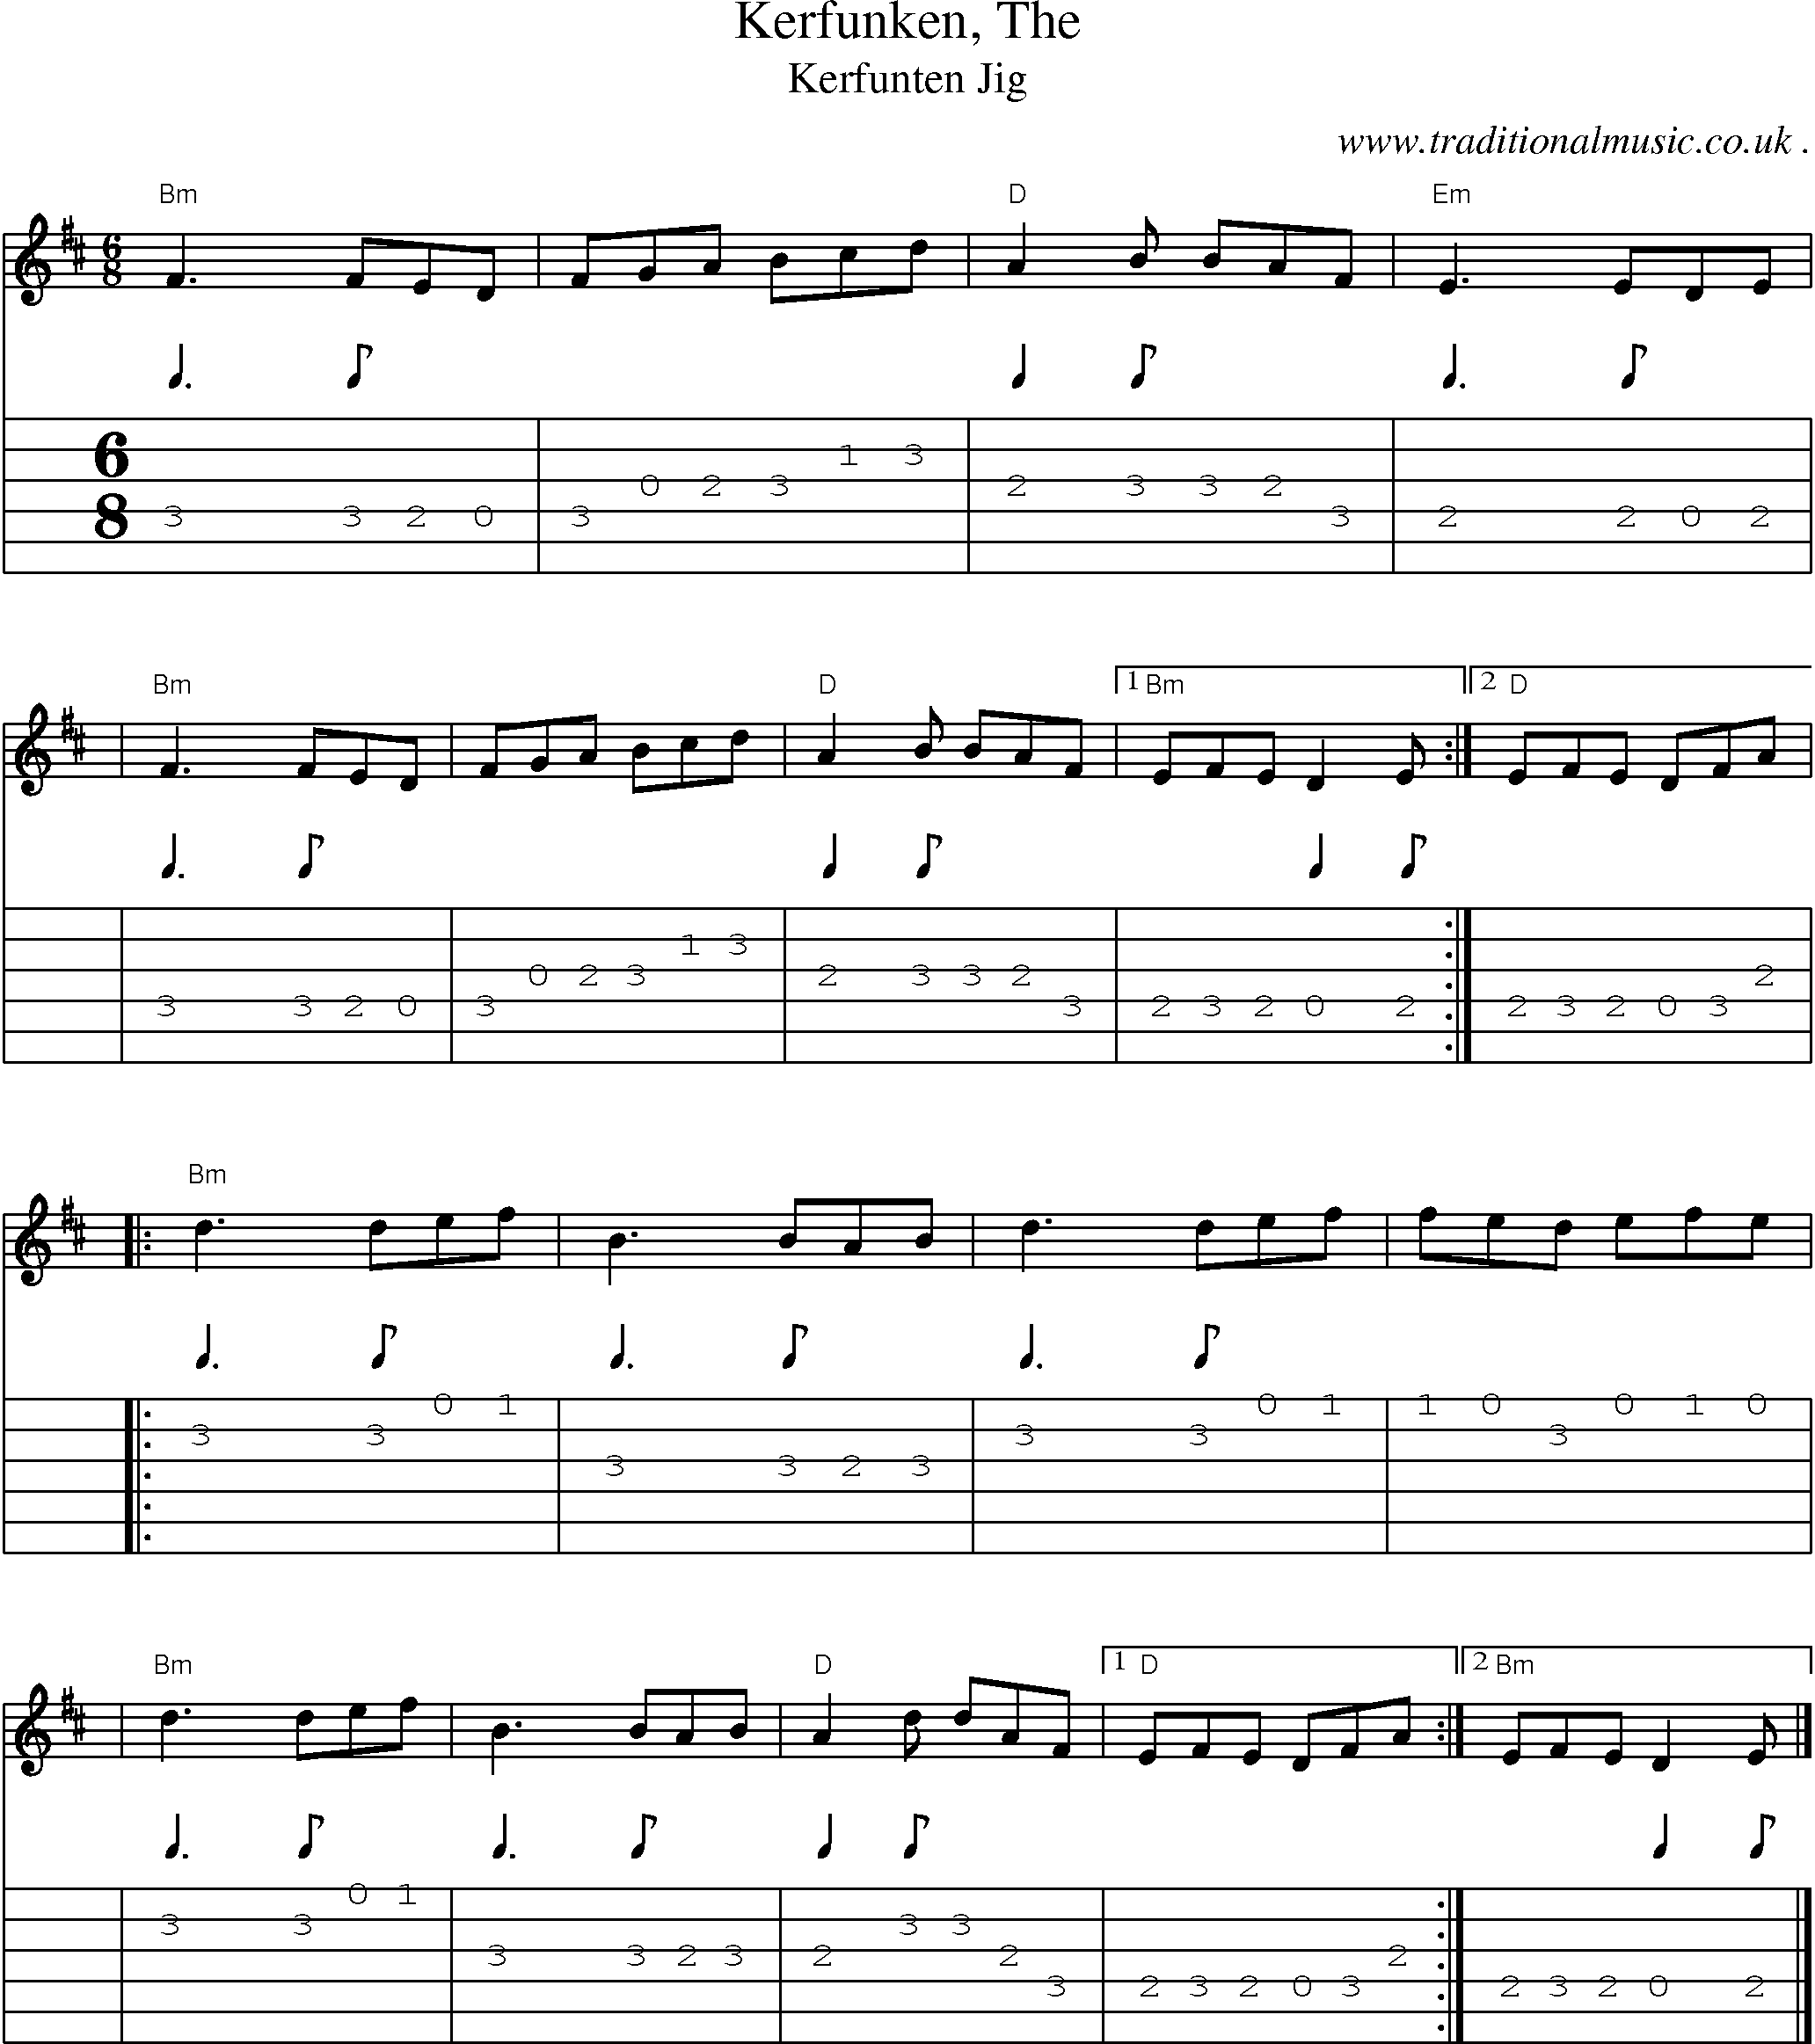 Music Score and Guitar Tabs for Kerfunken The